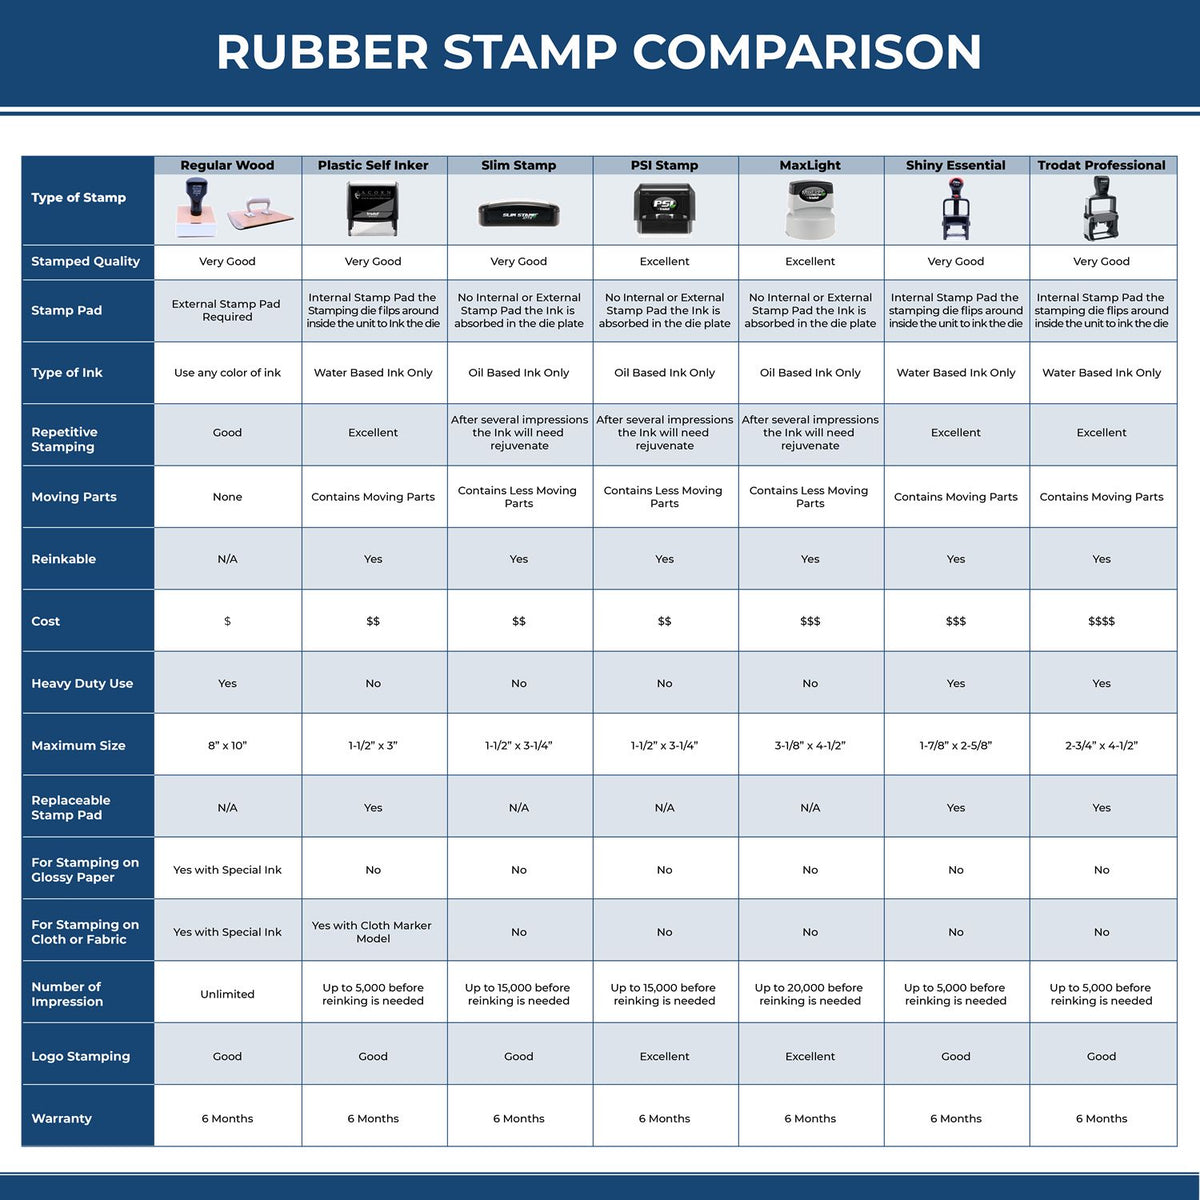 Large Please Forward Attending Physician&#39;s Insurance Form Rubber Stamp 4983R Rubber Stamp Comparison